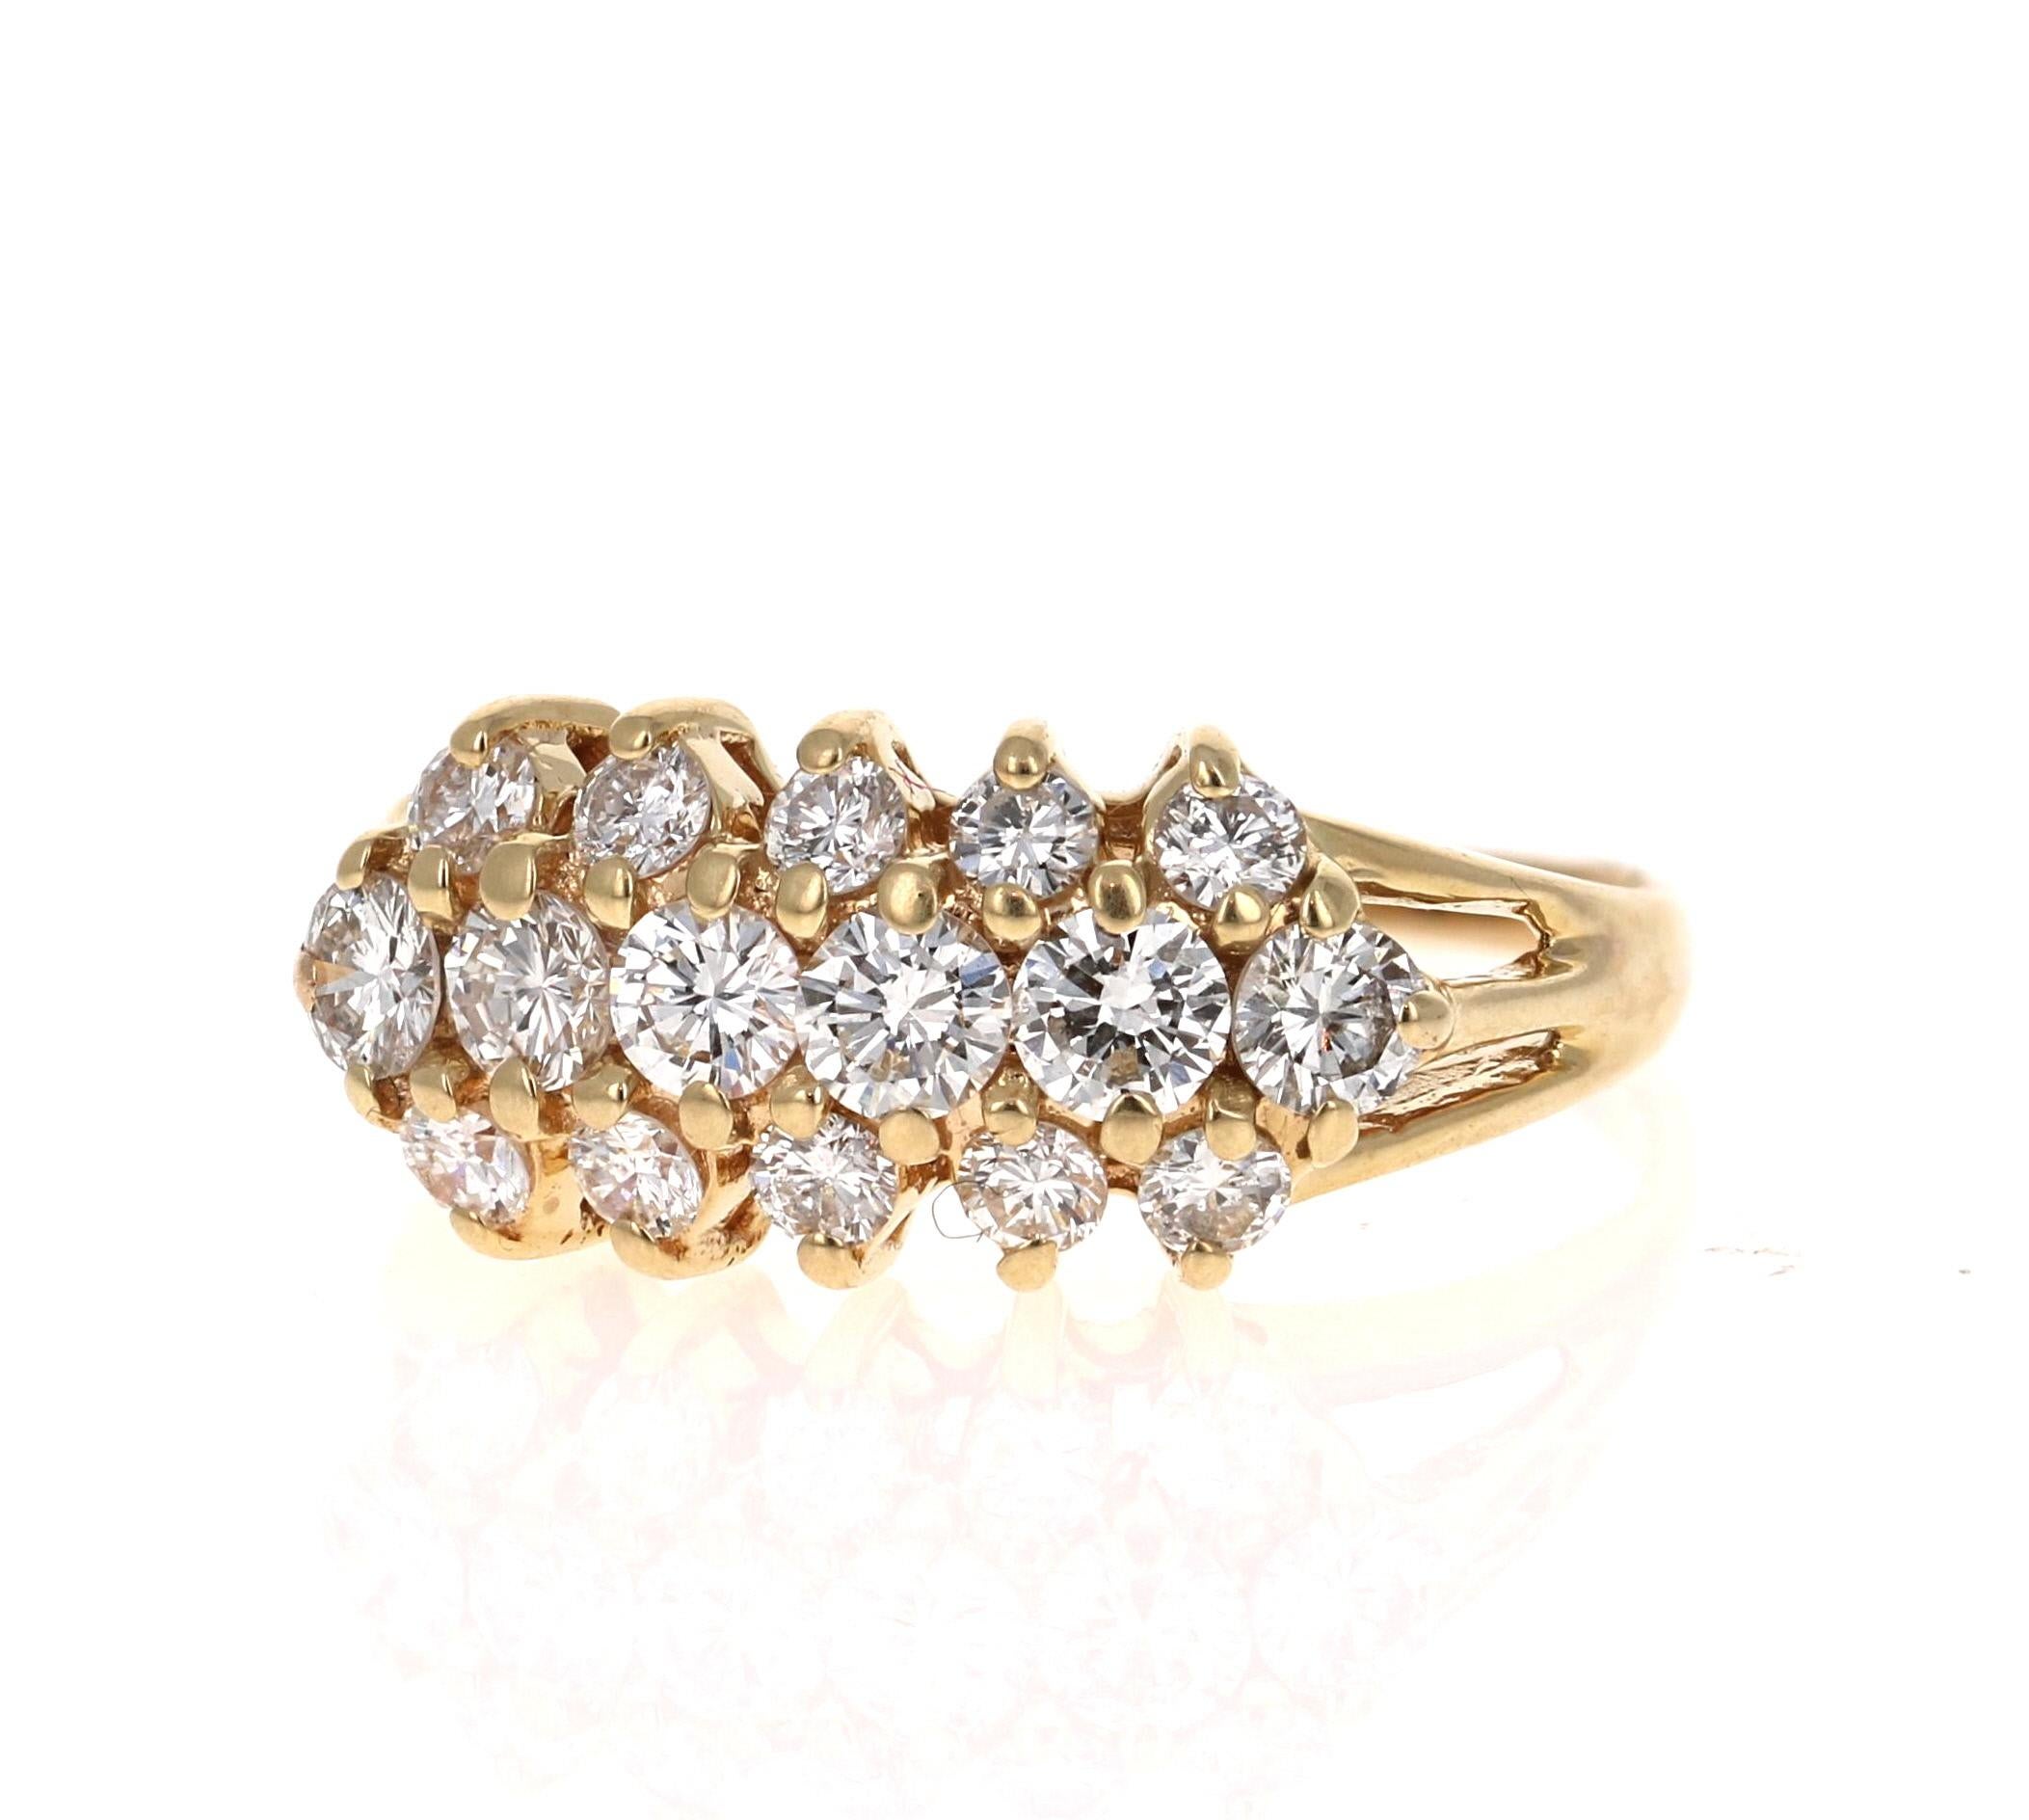 This classic cluster ring has 16 Round Cut Diamond that weighs 1.01 Carats (VS-I) 
The ring is set in 14 Karat Yellow Gold and has an approximate weight of 3.3 grams. 

The ring is a size 7 and can be re-sized free of charge if needed. 